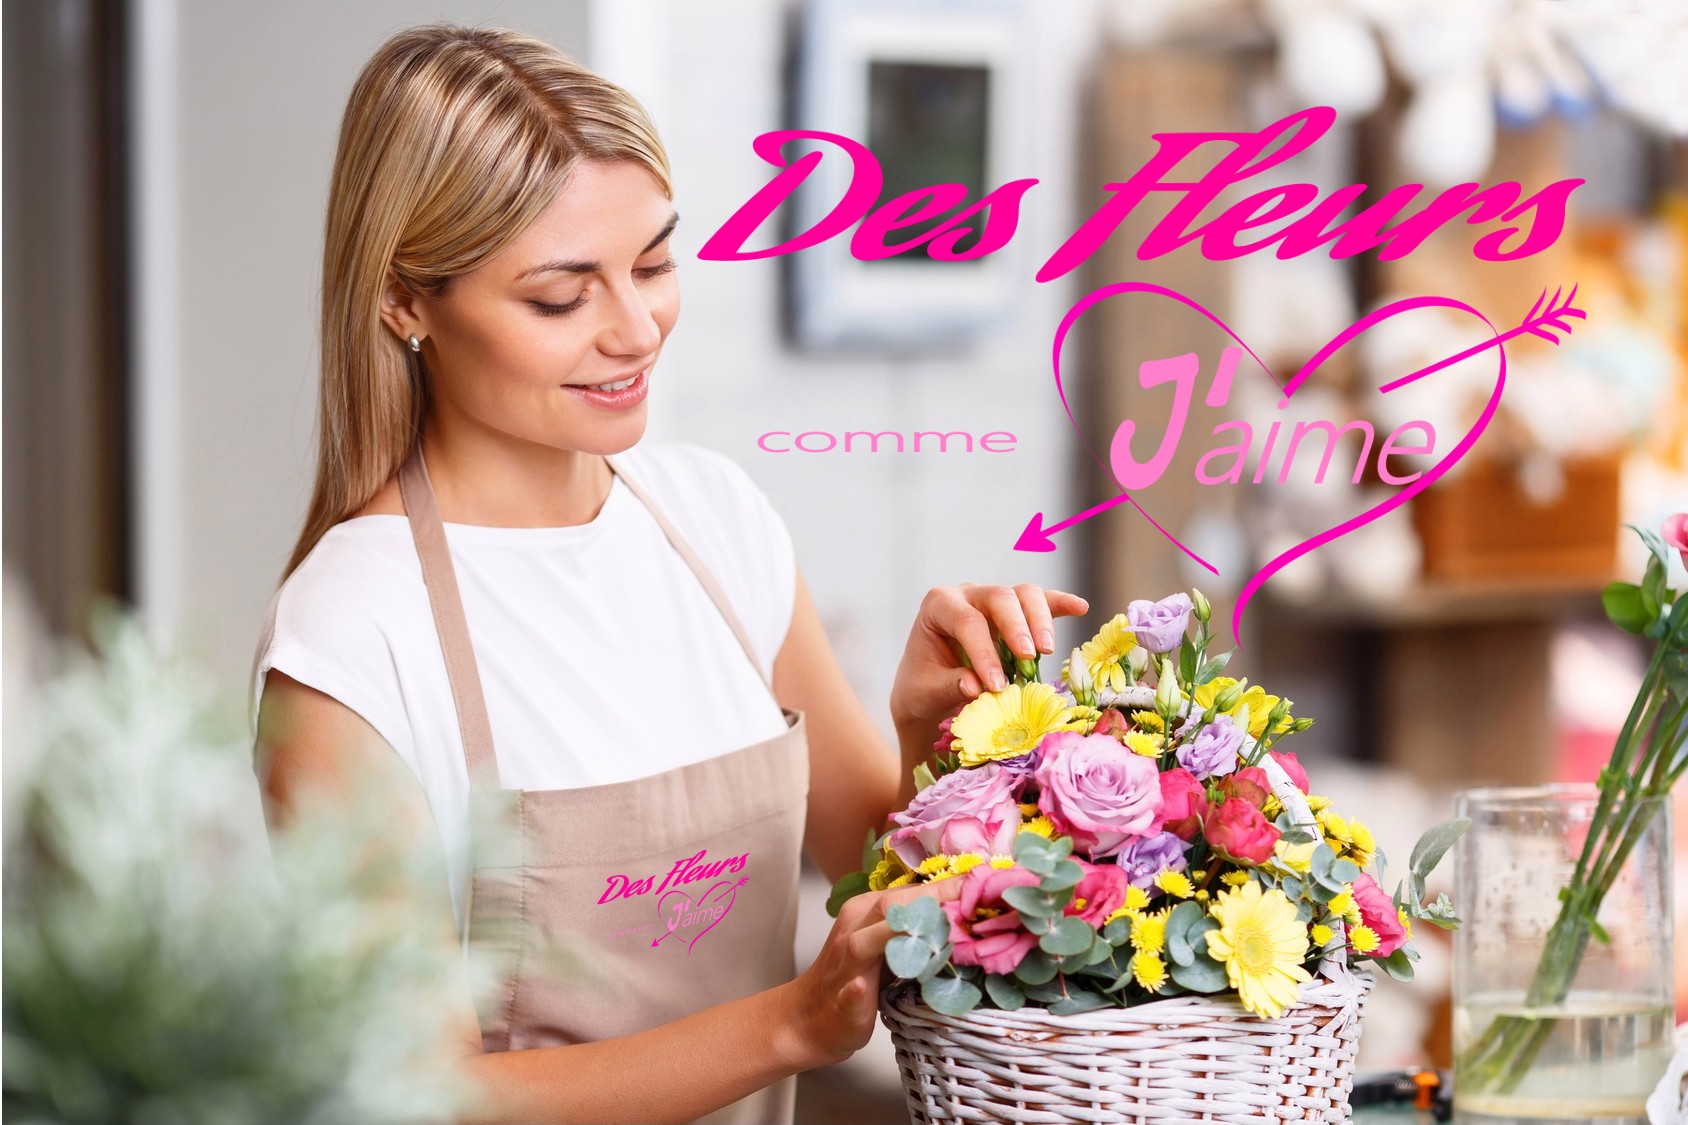 FLORIST IN BUTRY-SUR-OISE
 75 - FLOWERS DELIVERY BUTRY-SUR-OISE
